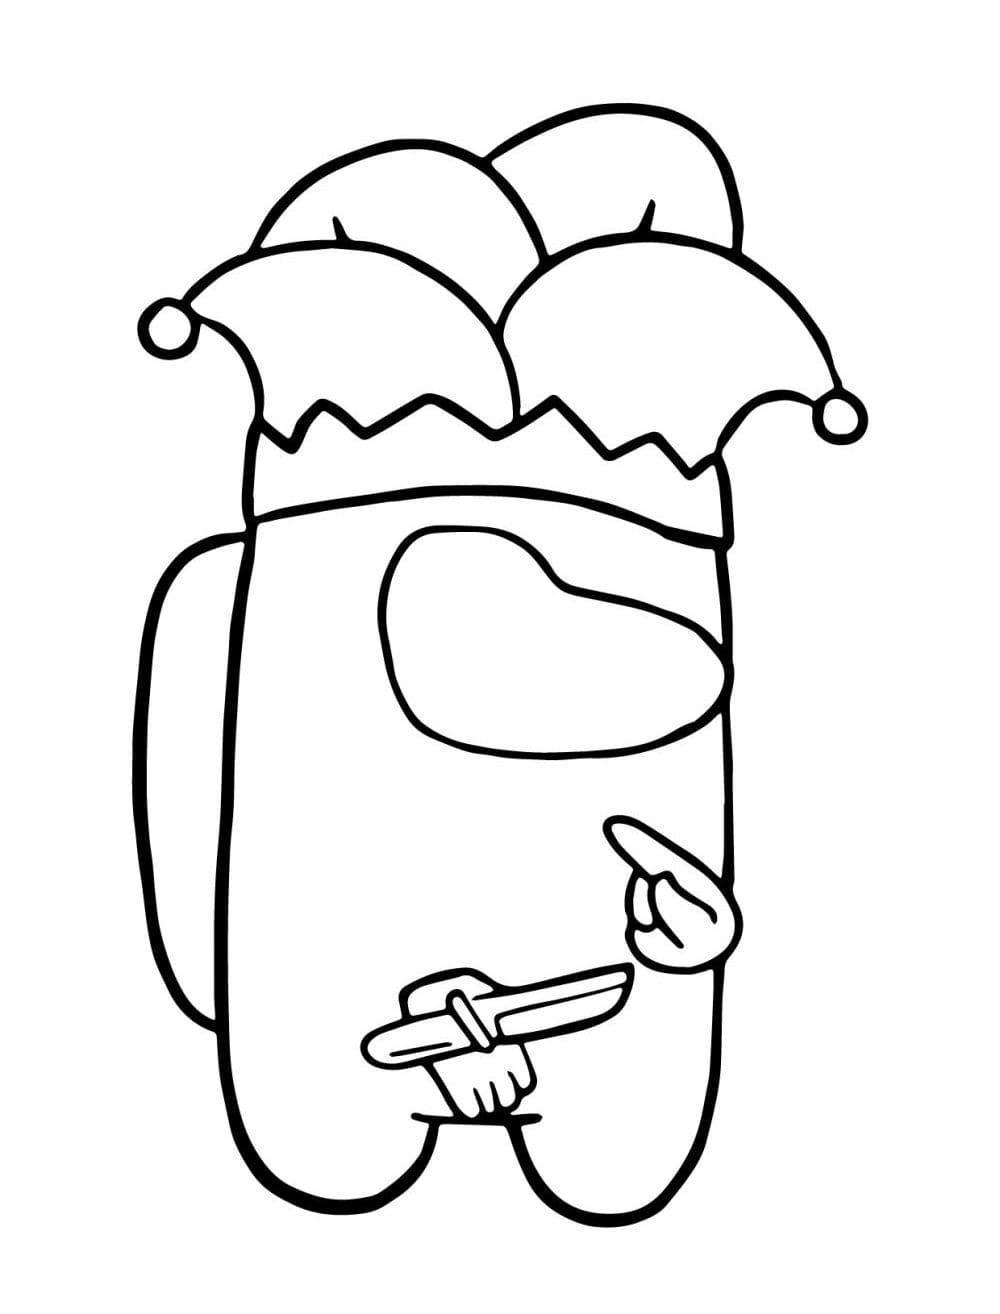 Coloring page Among Us A Imposter in a clown costume